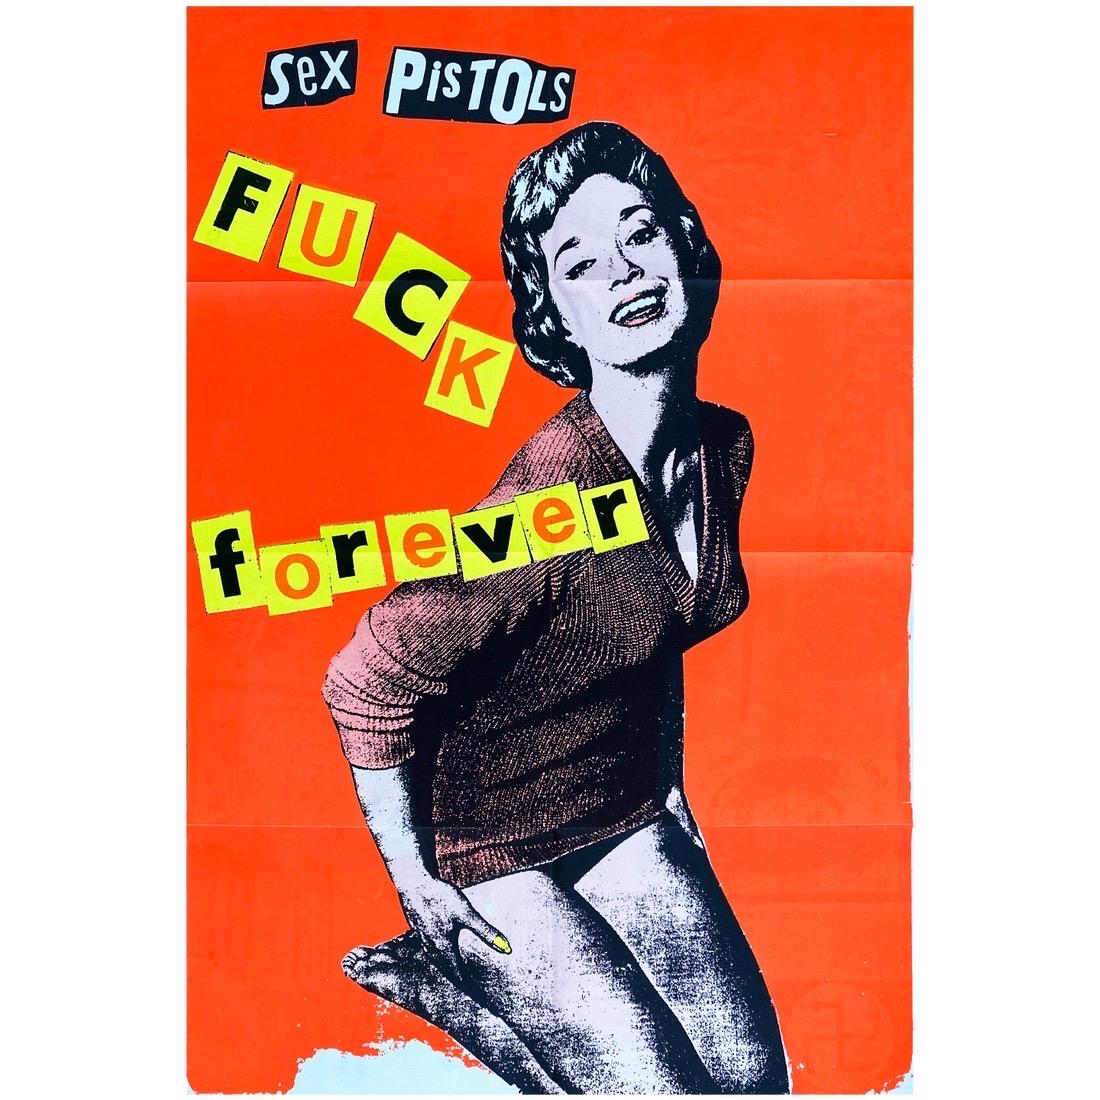 Jamie Reid, Fuck Forever Hamiltons Gallery, 1986

Vintage folded screenprint

Open edition 

67 x 100 cm  26 2/5 x 39 2/5 in

 

This is a vintage production for Jamie Reid’s 1986 exhibition at Hamilton’s Gallery in Mayfair, London from a recently